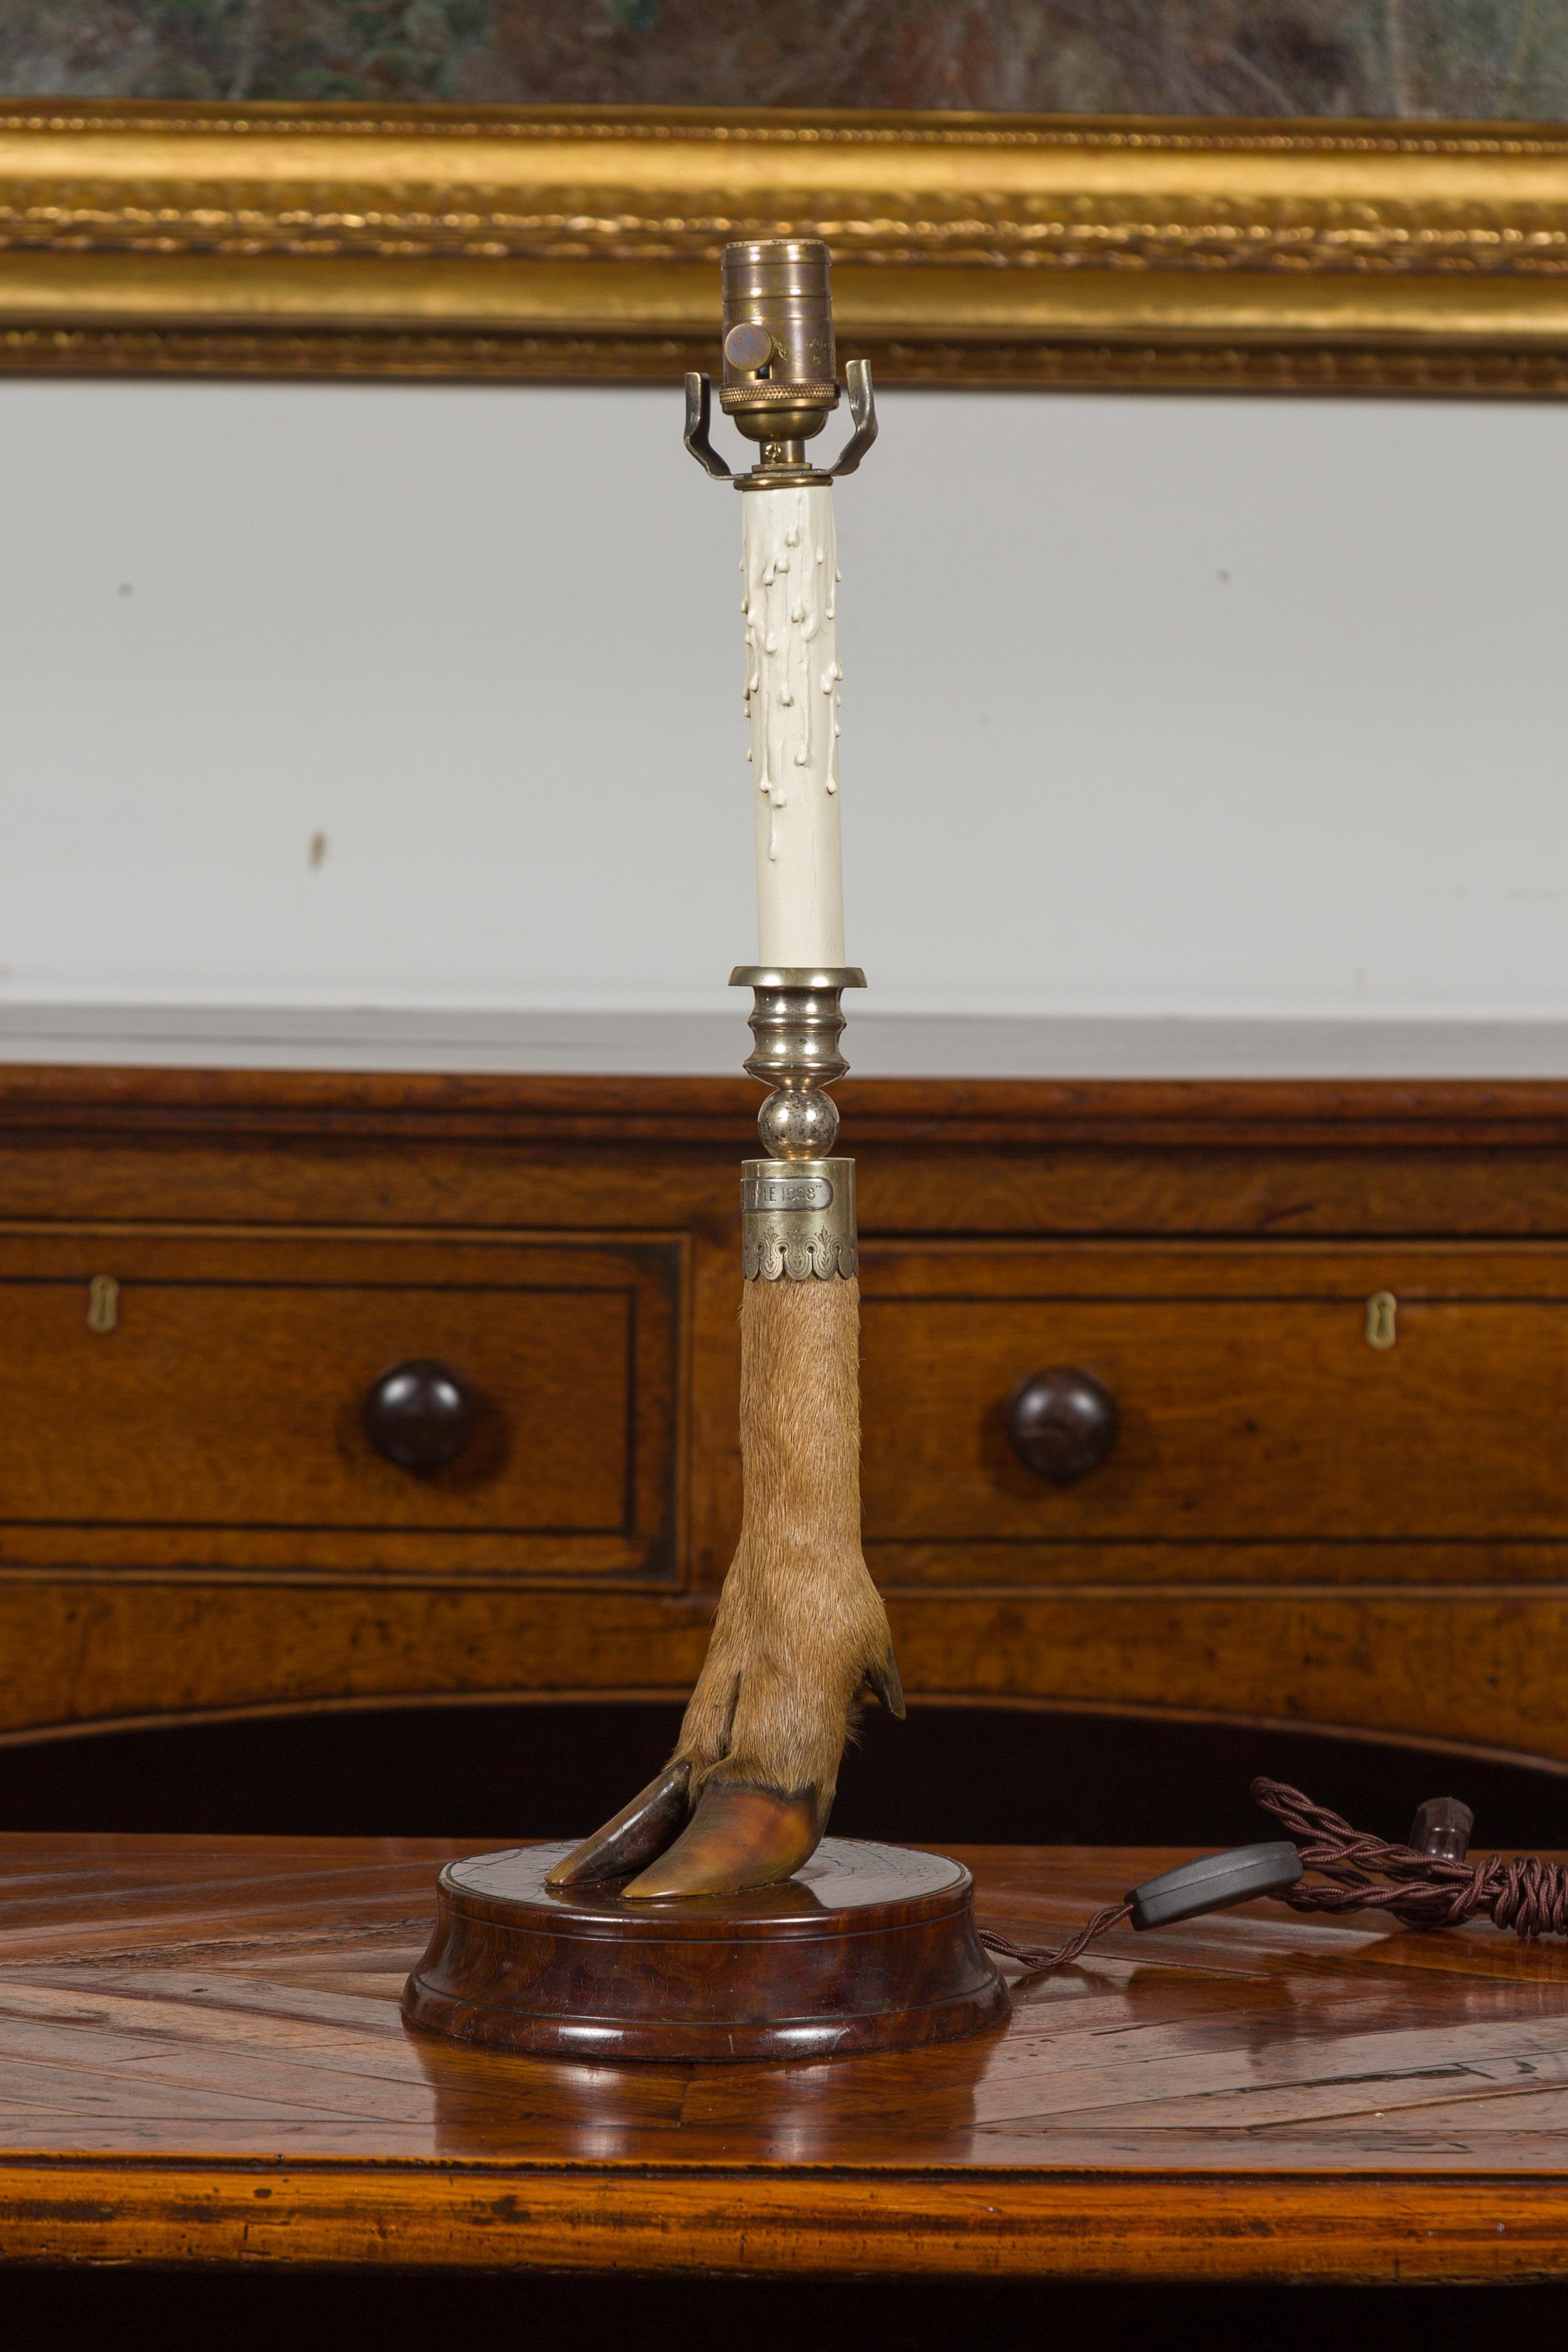 An English deer leg table lamp from the early 20th century, mounted on a circular wooden base. Created in England and dated 1908 on the label, this table lamp draws our attention with its slender deer leg mounted on a circular wooden base. Wired for